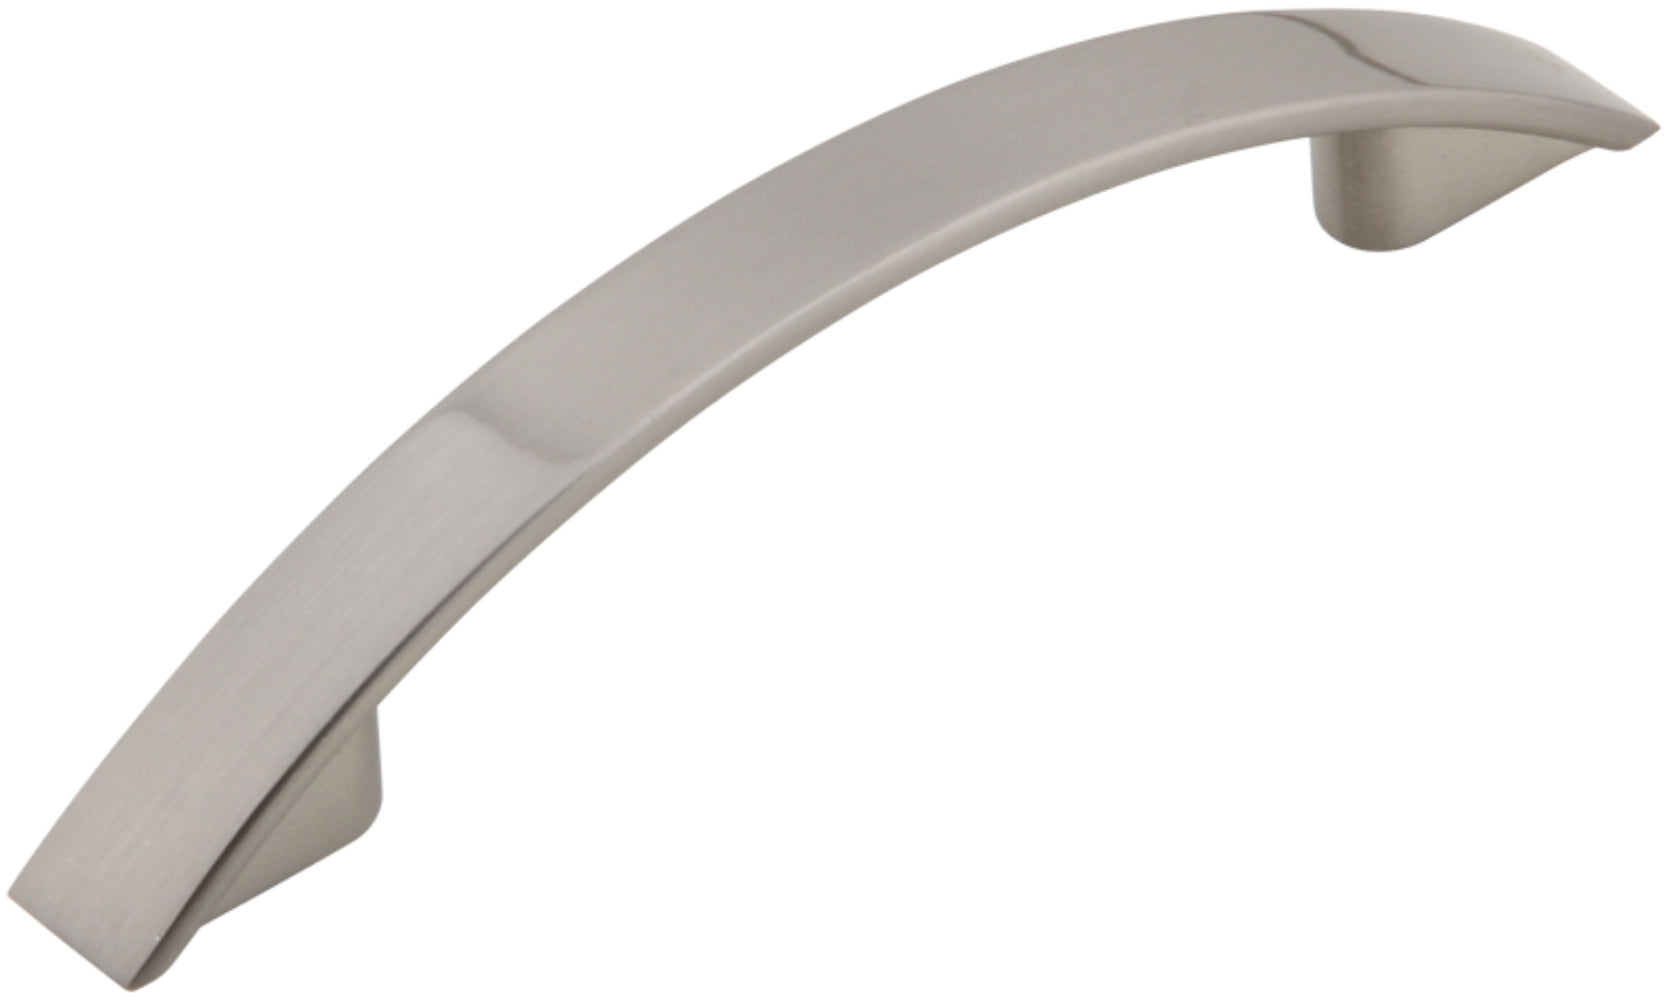 Silverline P2063 - 5 inch (128mm) Zinc Alloy Arched Curved Contemporary Cabinet Pull Handle in Brushed Satin Nickel Finish CC: 3-3/4 inch (96mm)